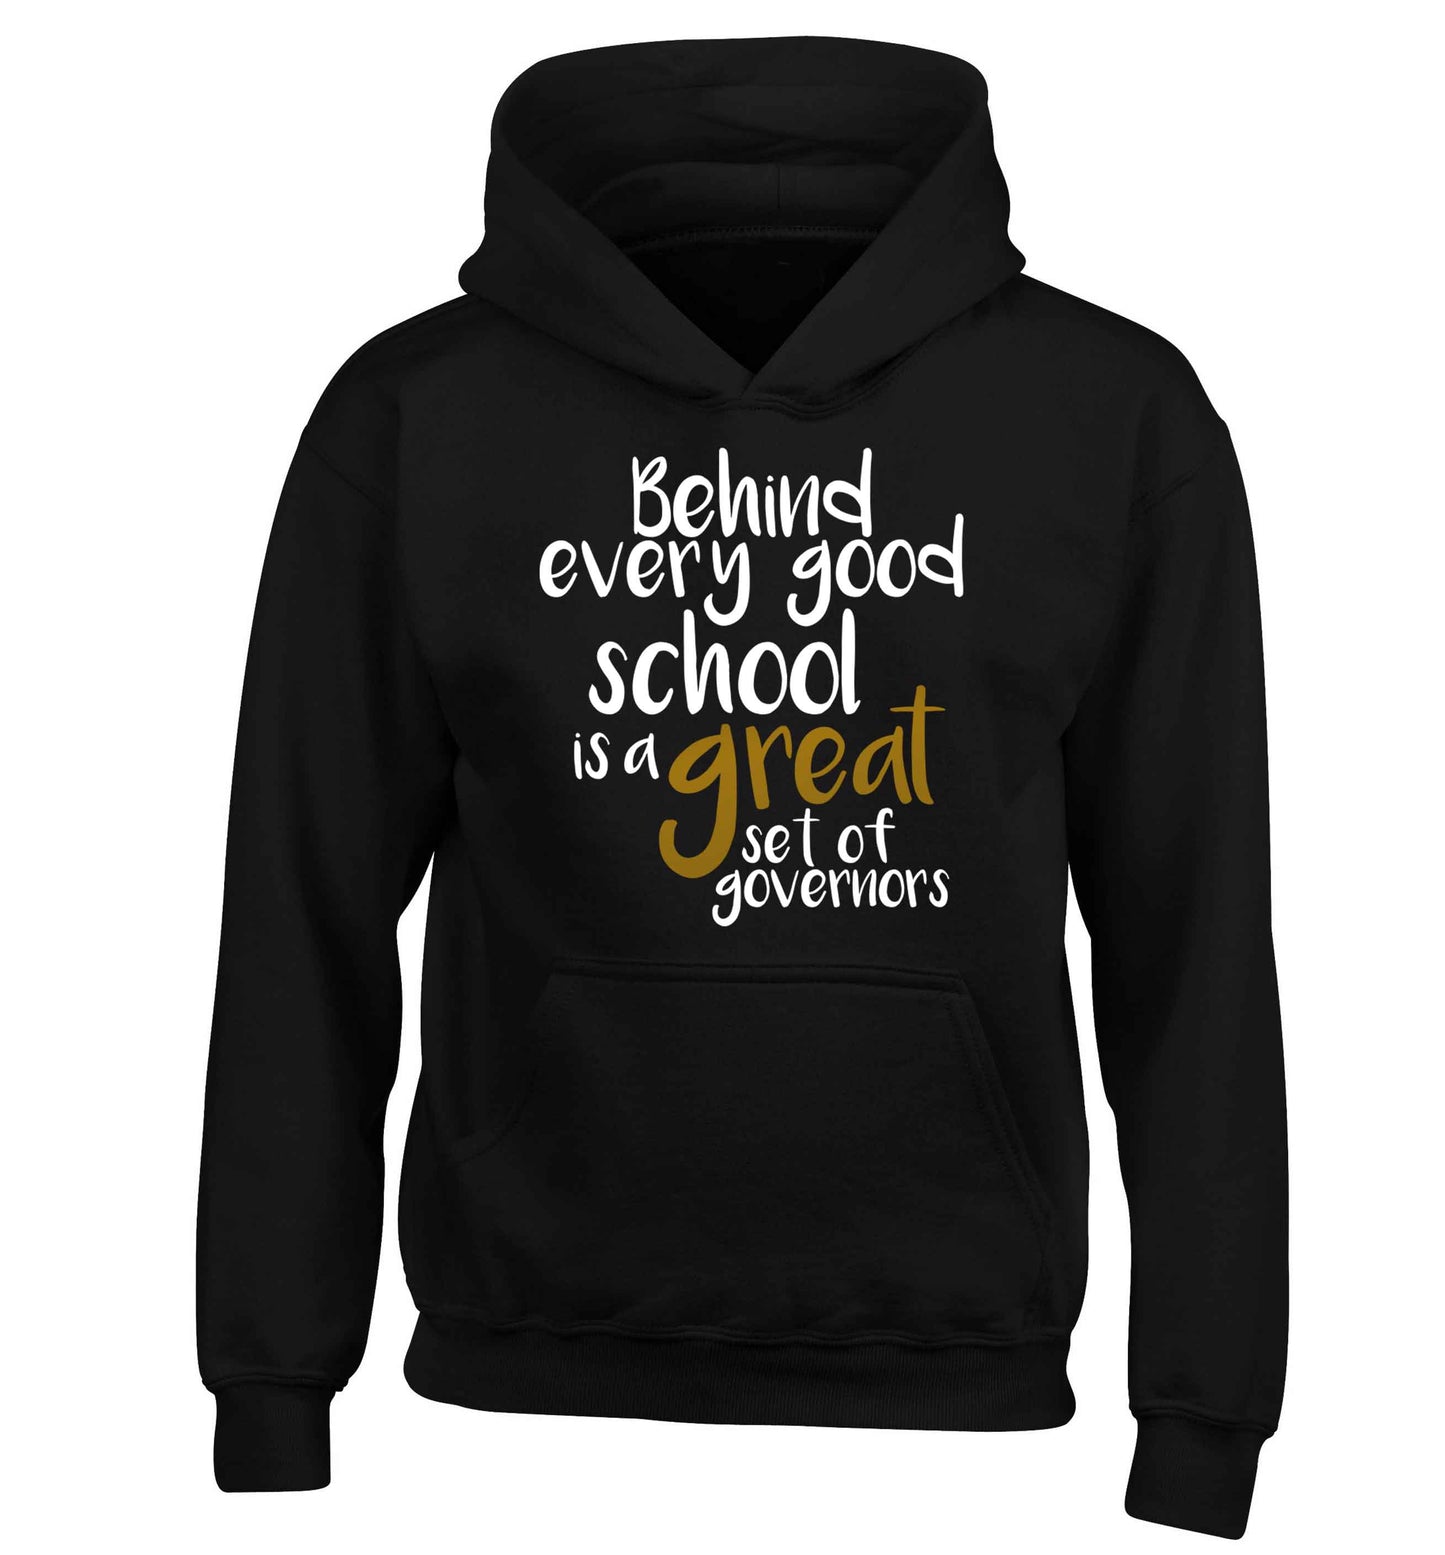 Behind every good school is a great set of governors children's black hoodie 12-13 Years